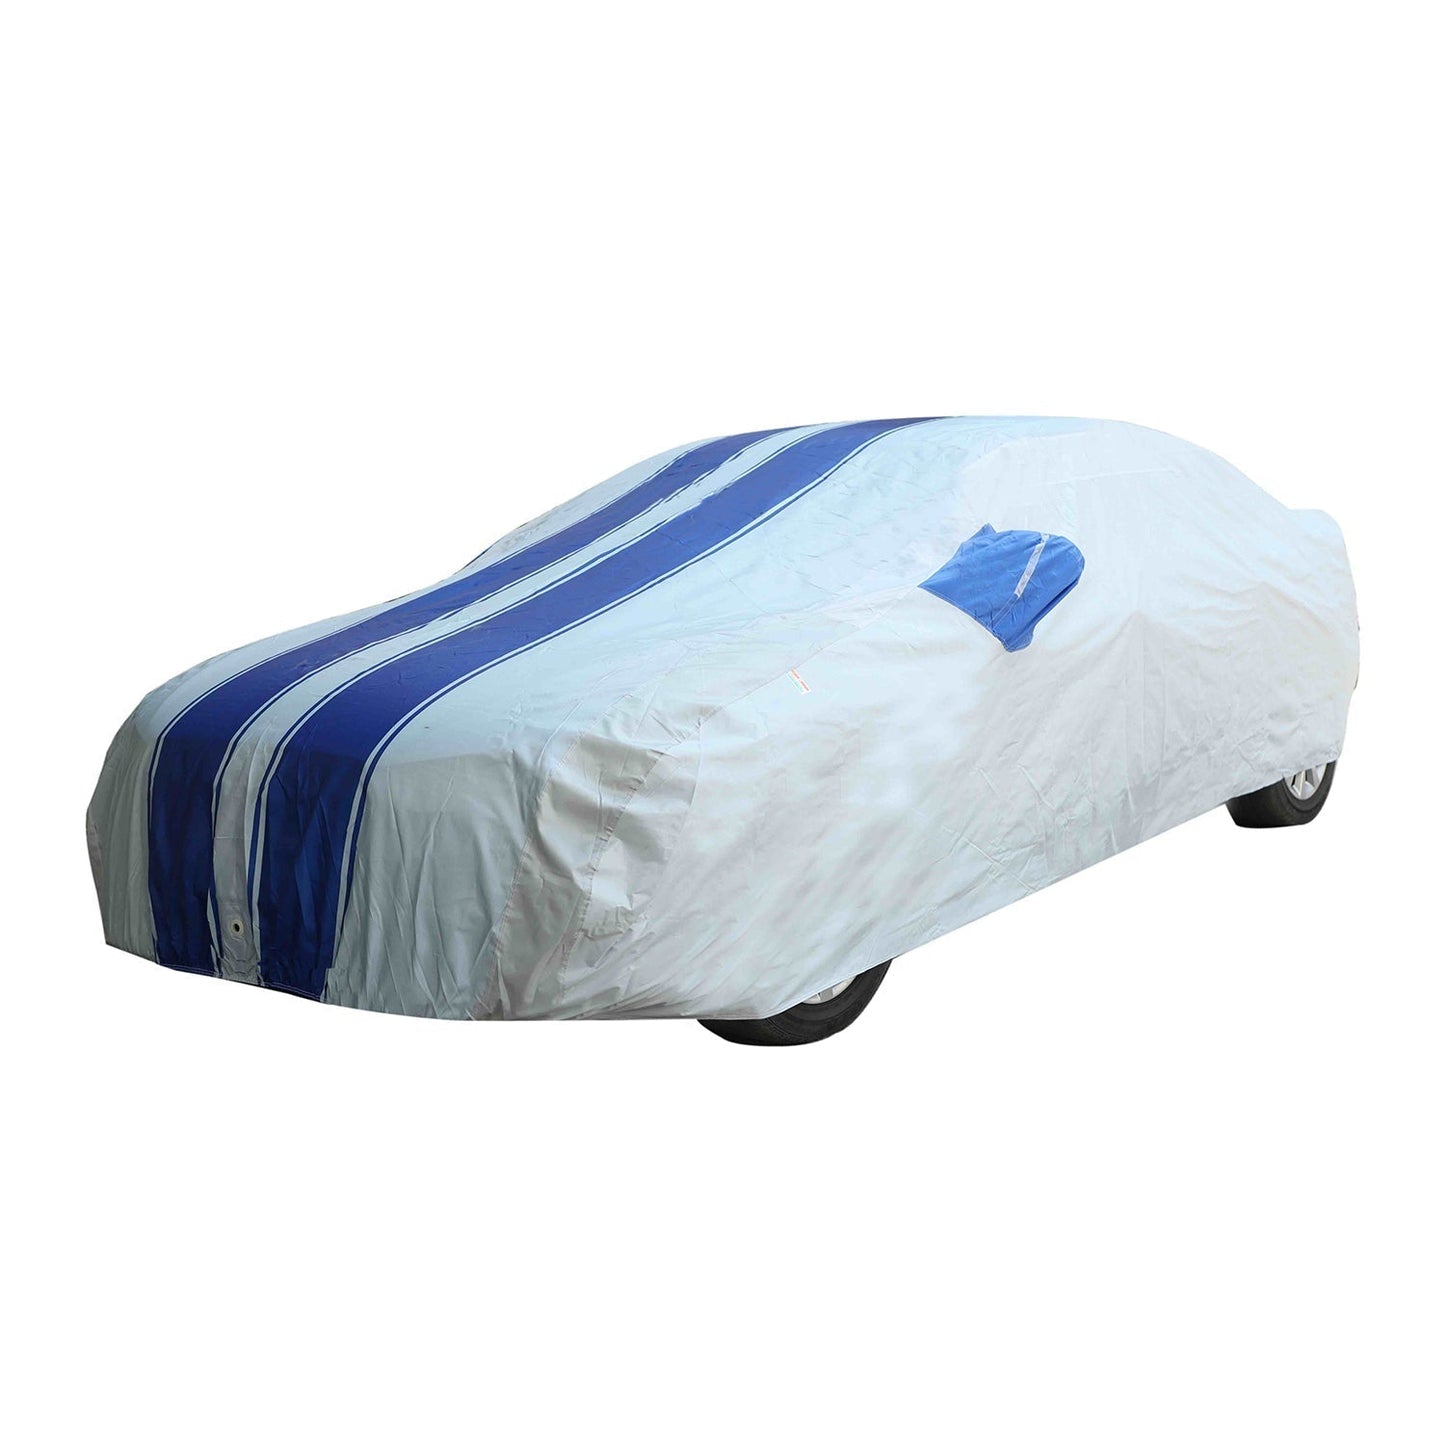 Oshotto 100% Blue dustproof and Water Resistant Car Body Cover with Mirror Pockets For Skoda Rapid